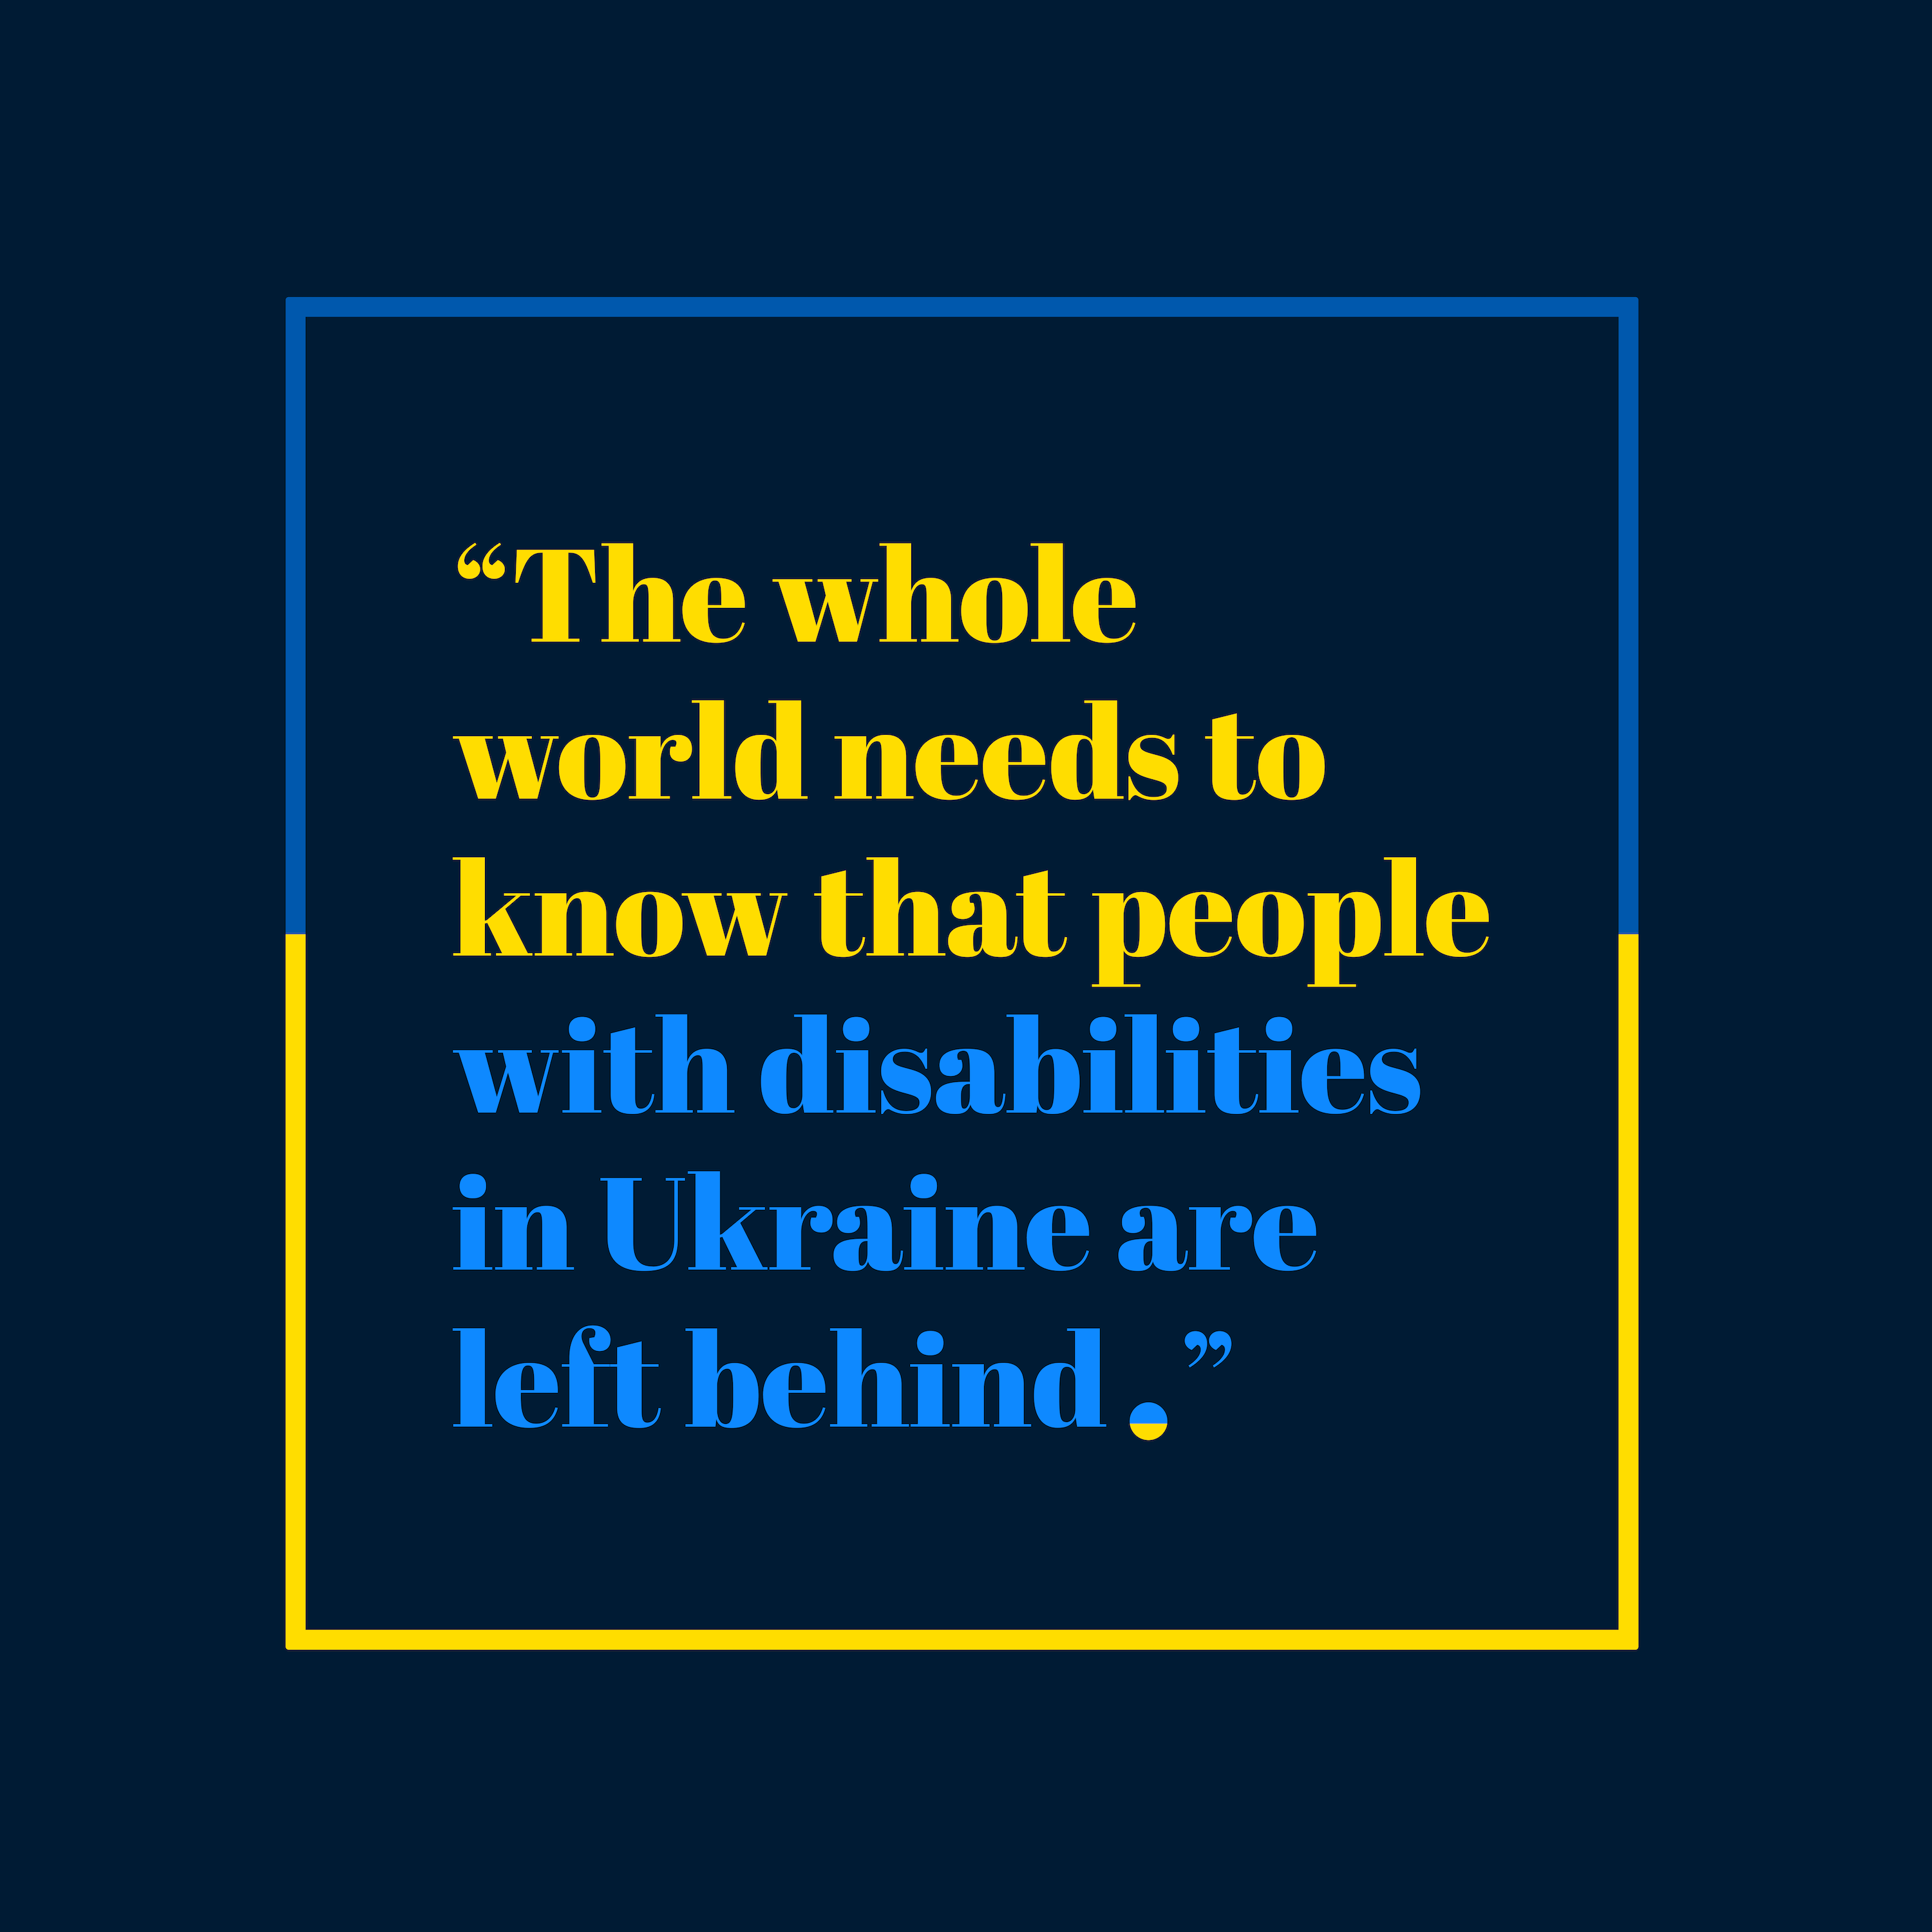 the whole world needs to know that people with disabilities in ukraine are left behind.